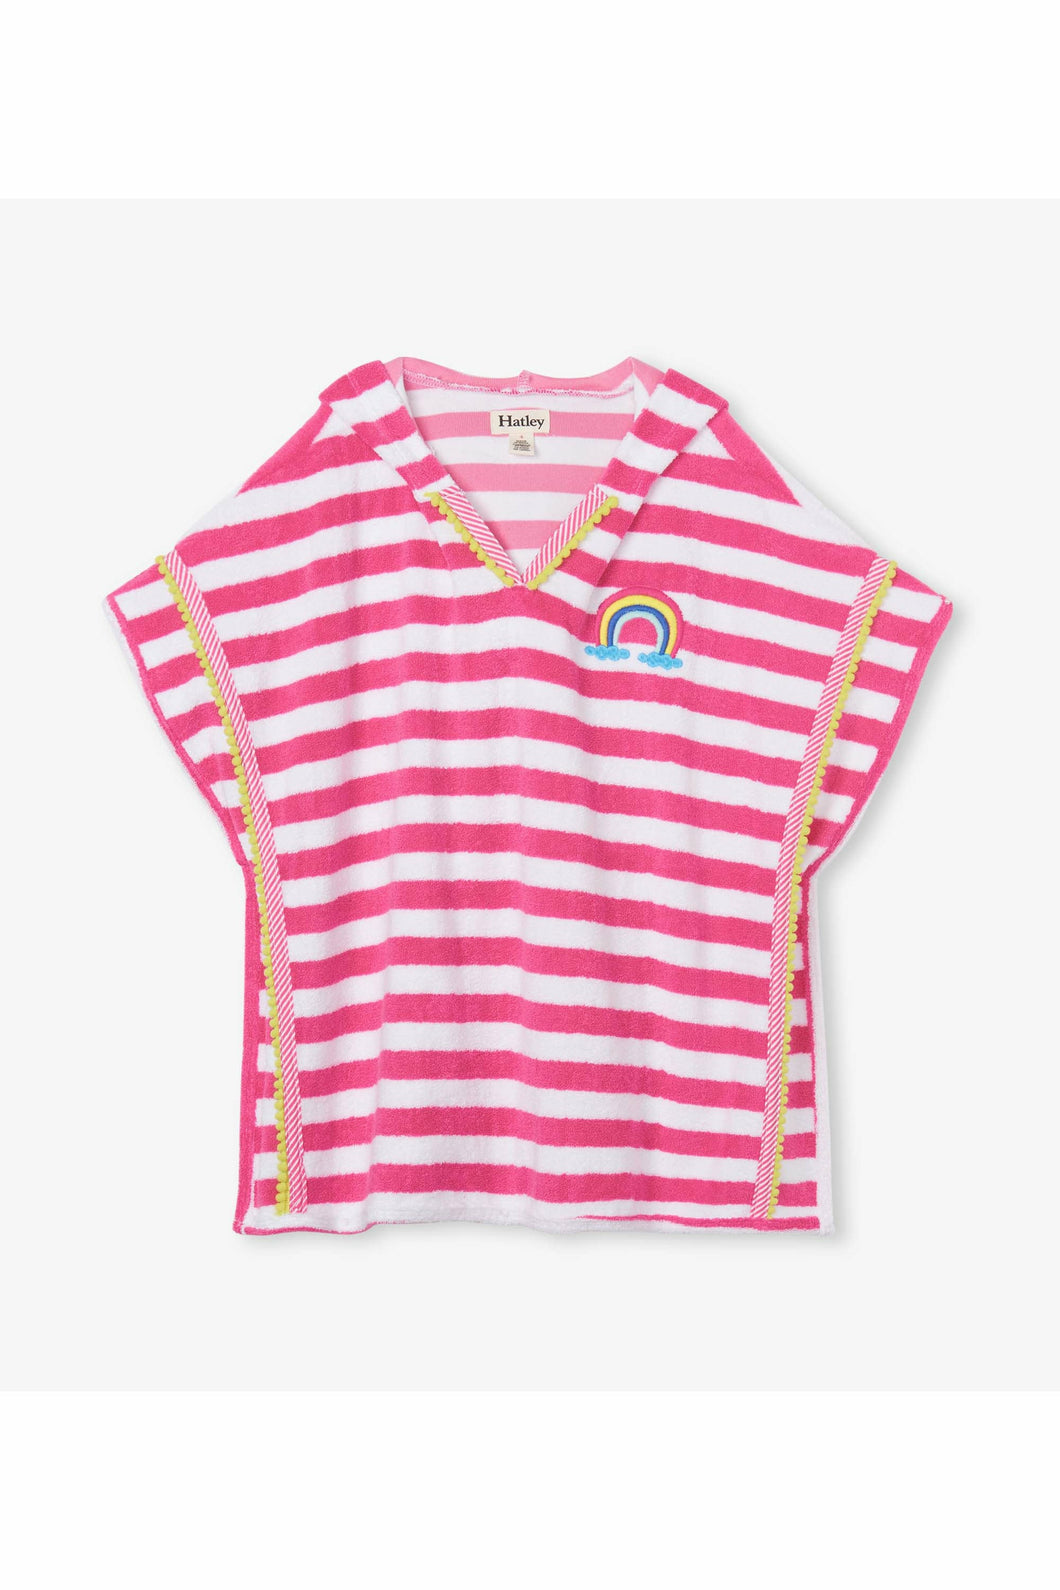 CAP SLEEVE TODDLER RAINBOW DETAIL COVER-UP